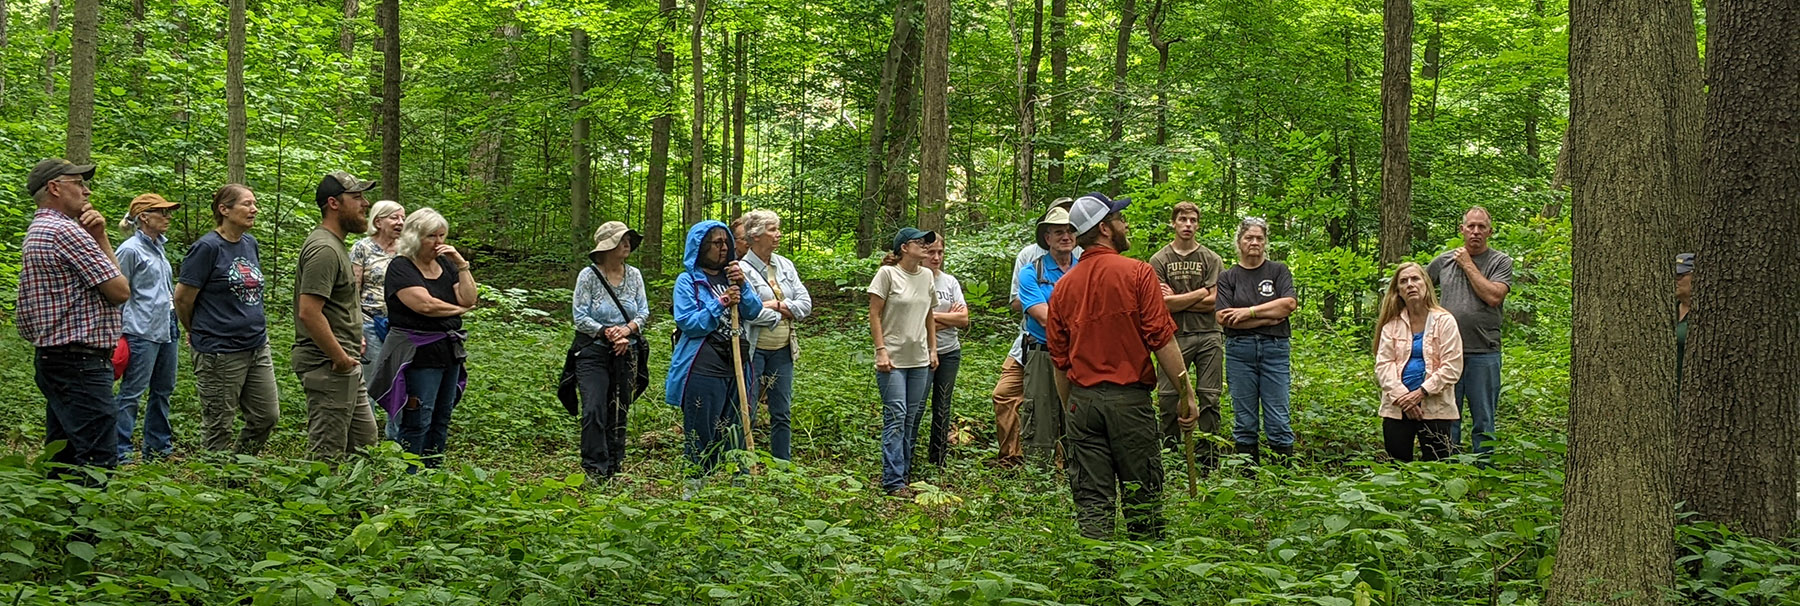 Wednesdays in the Wild Tour group in the woods at Stephens Forest